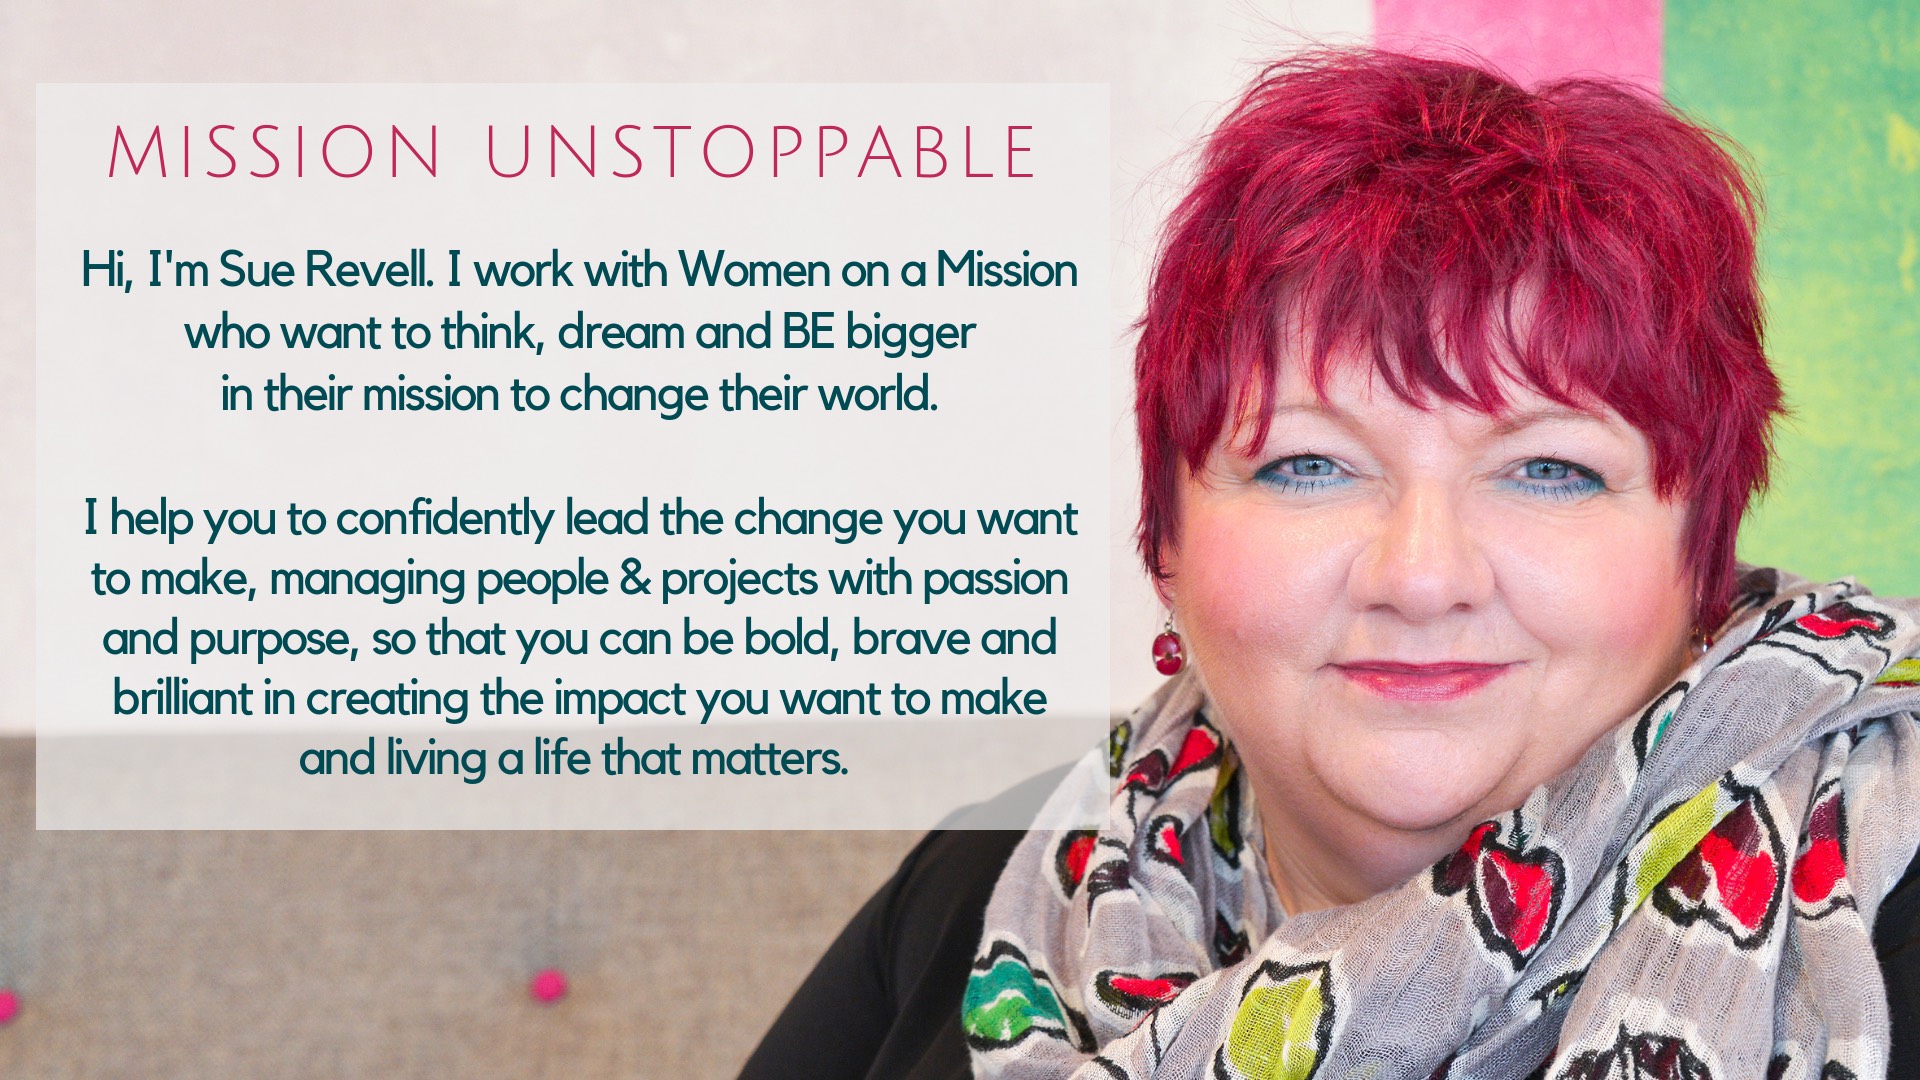 Sue Revell - Mission Unstoppable image header